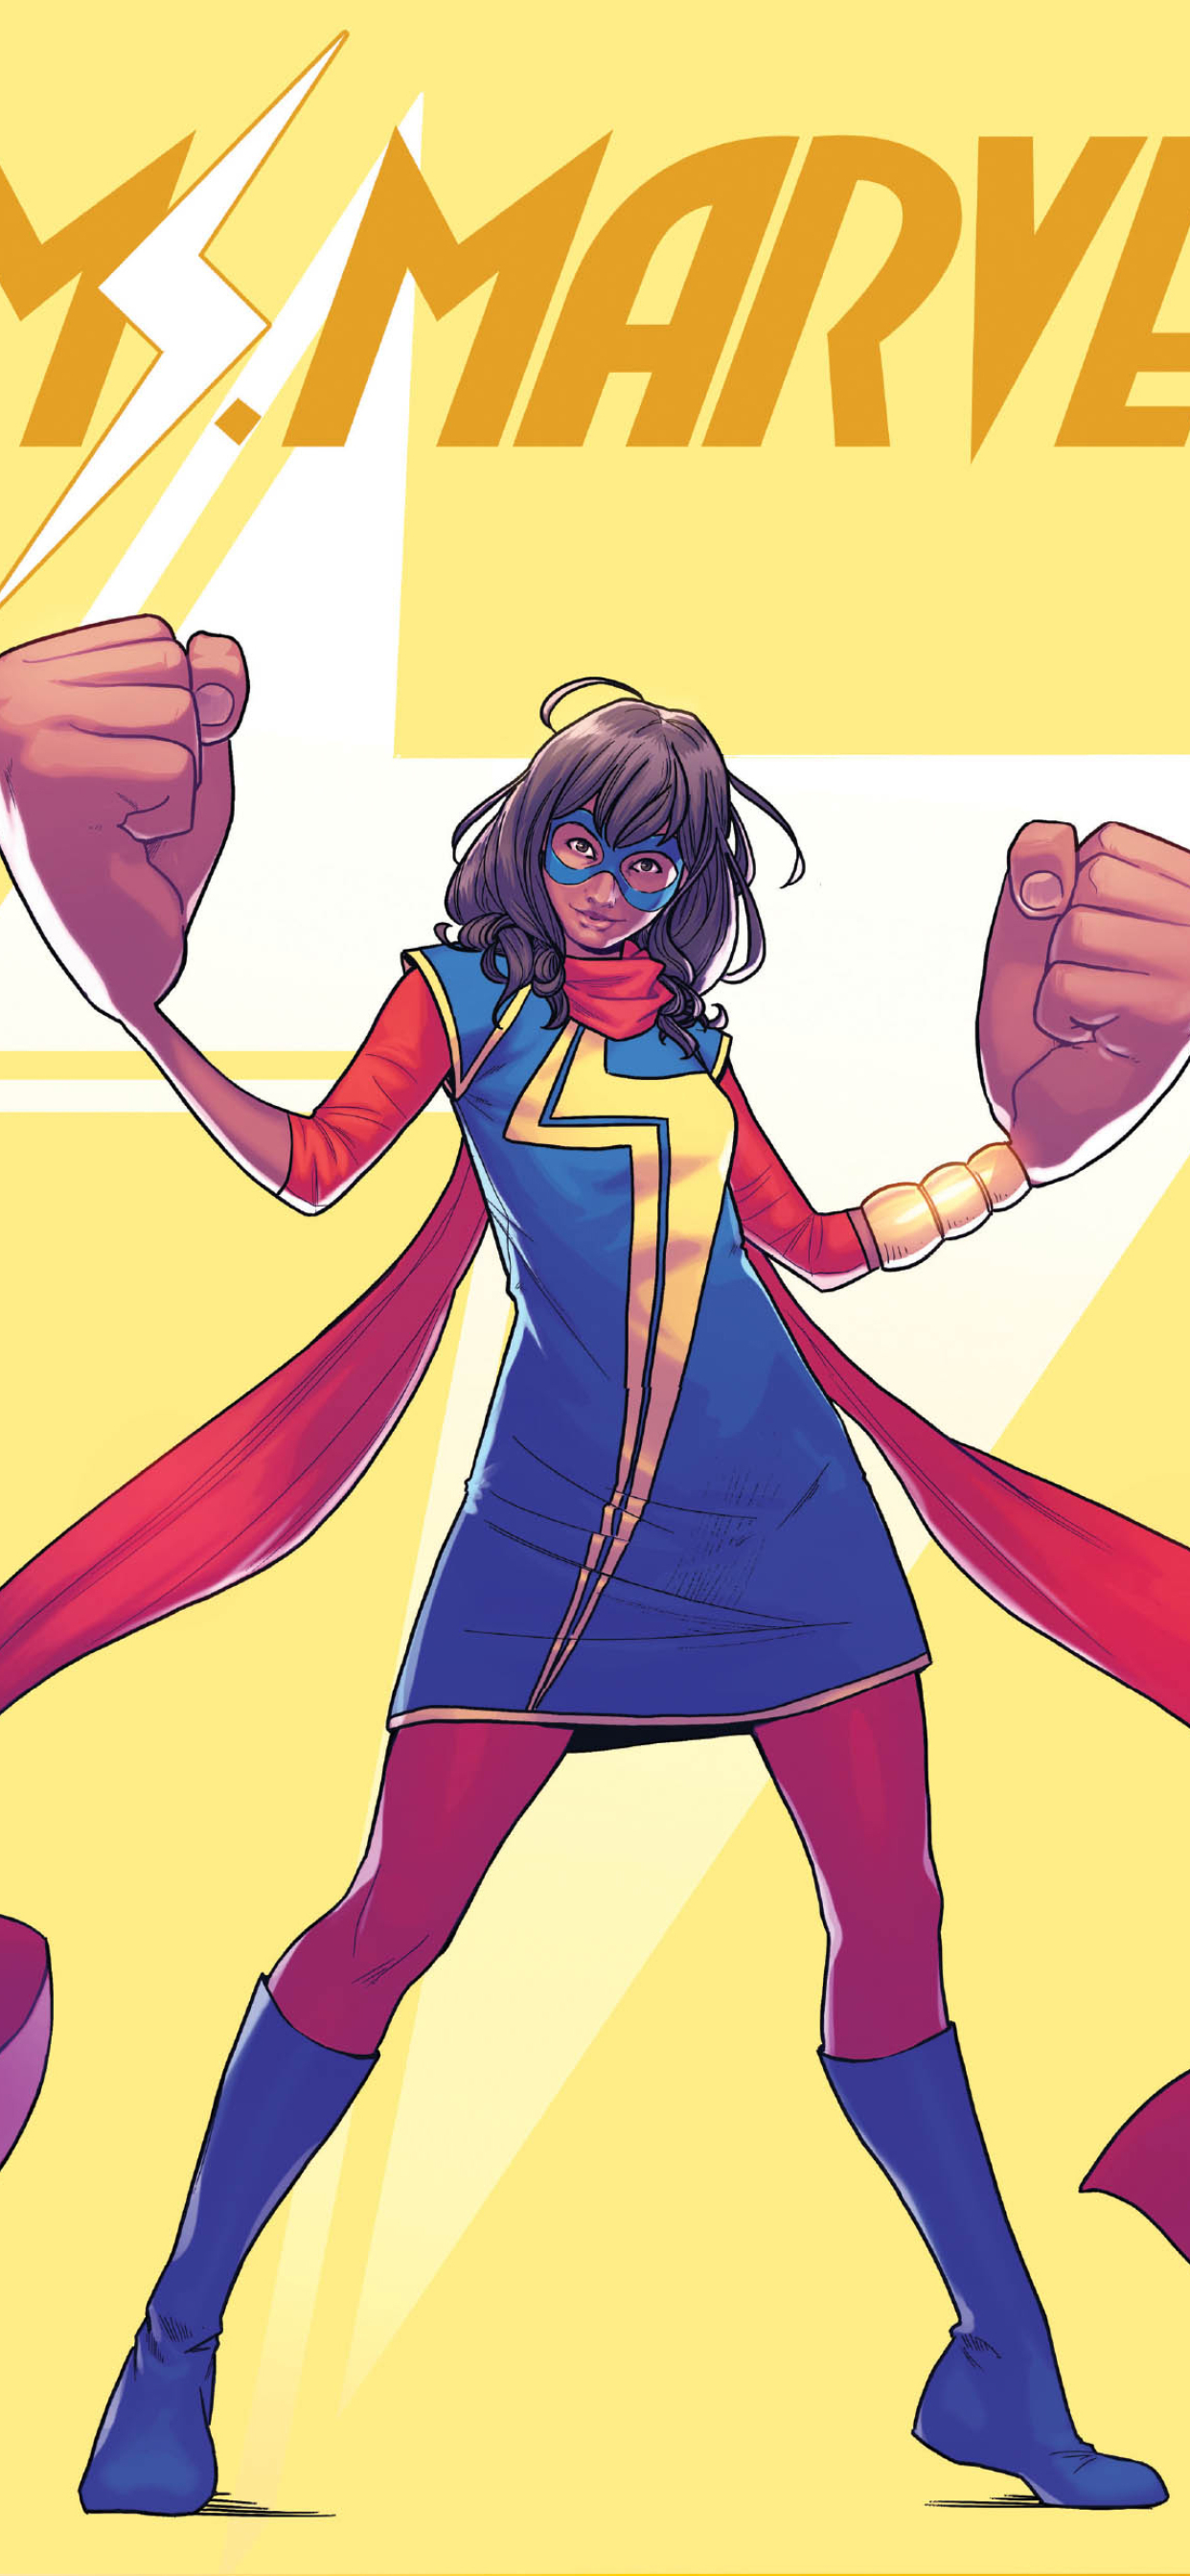 1242x26 Mcu Kamala Khan As Ms Marvel Iphone Xs Max Wallpaper Hd Superheroes 4k Wallpapers Images Photos And Background